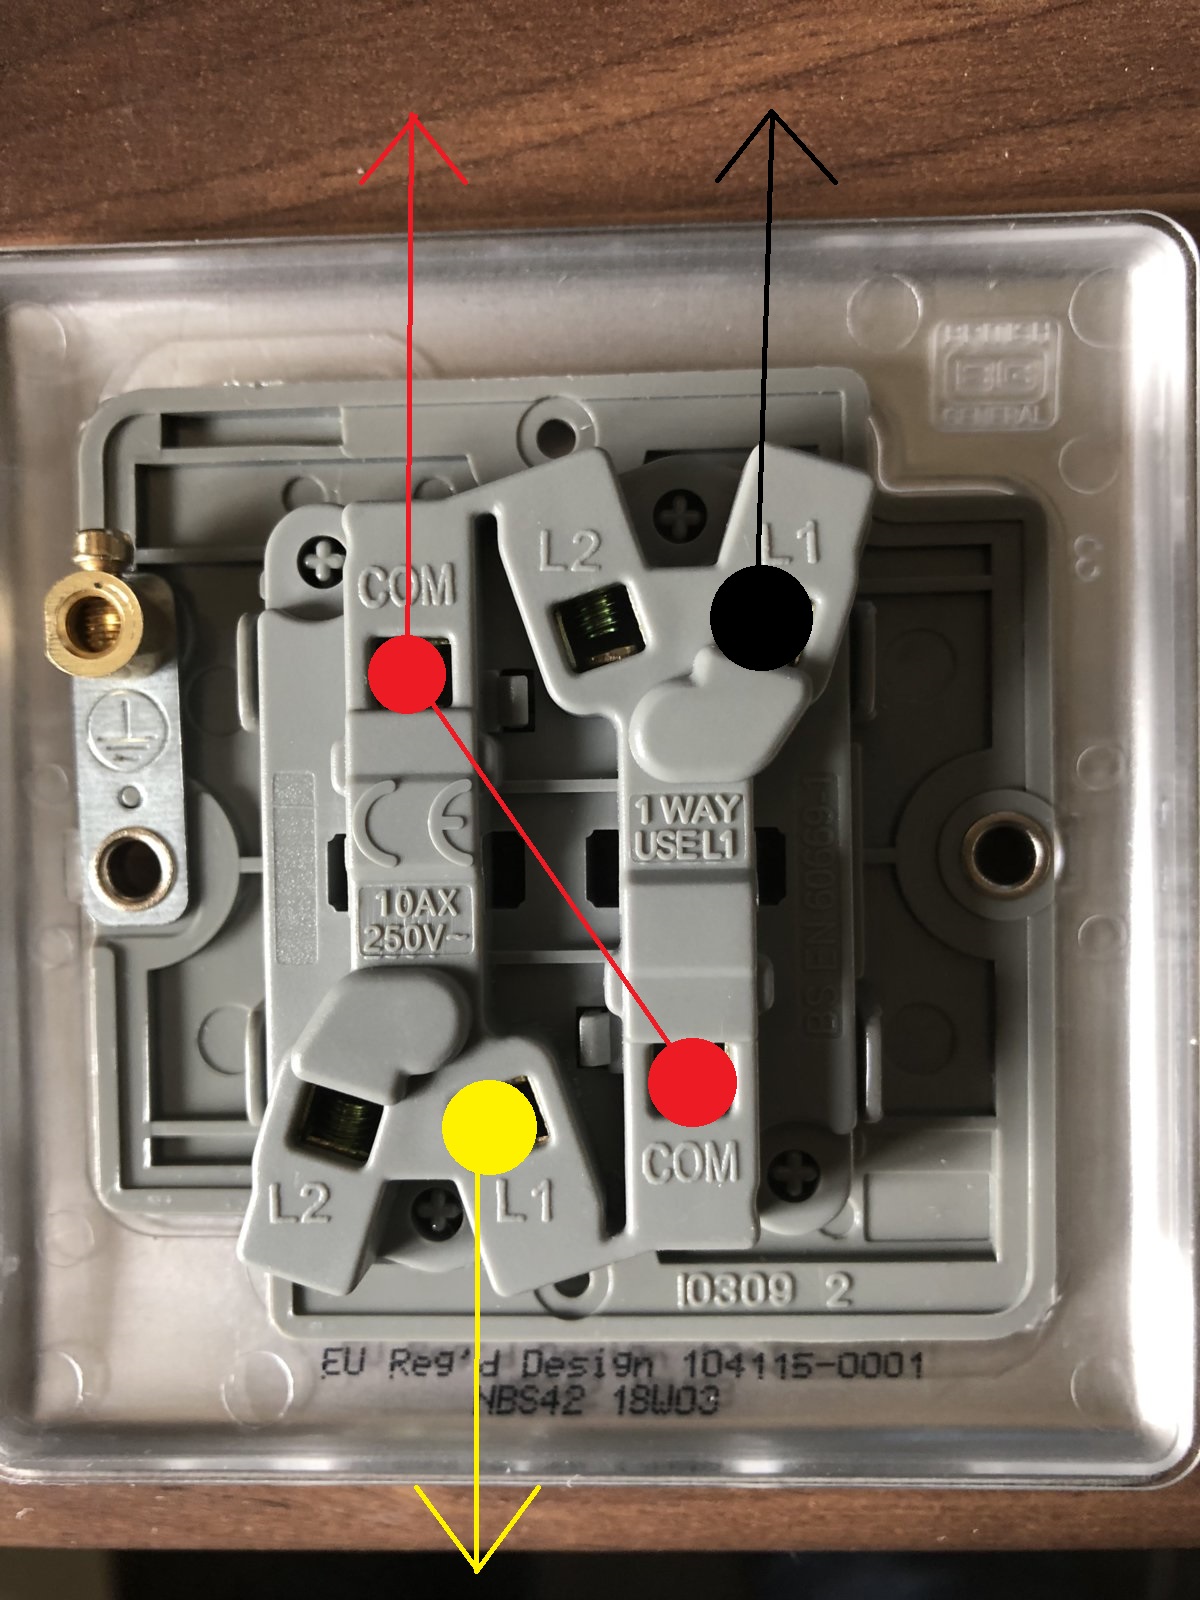 3 way to 2 way switch - confused by wiring | DIYnot Forums